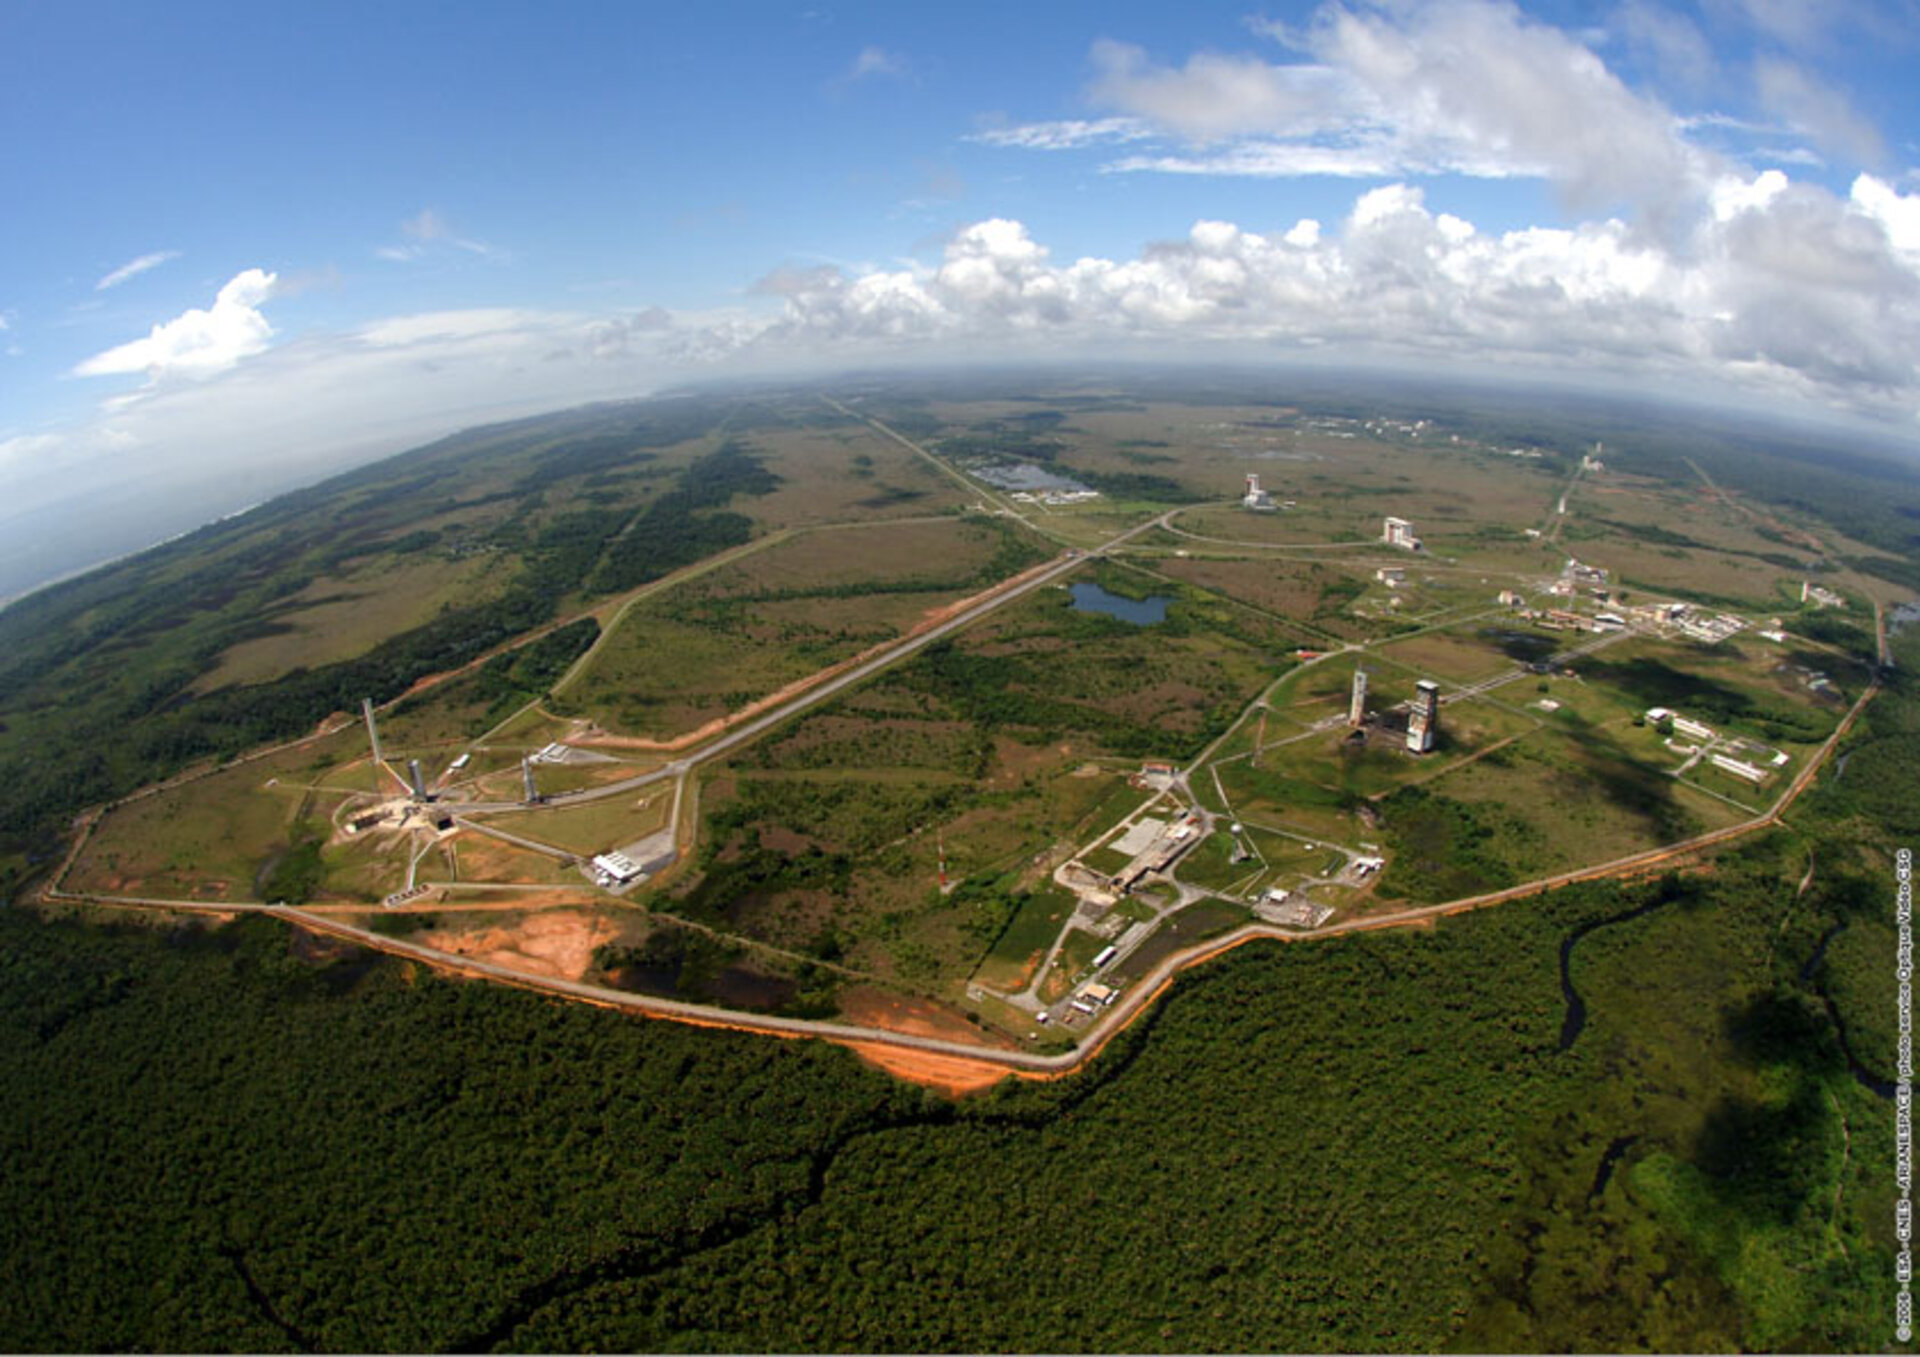 The conference will be held at Europe's spaceport in Kourou